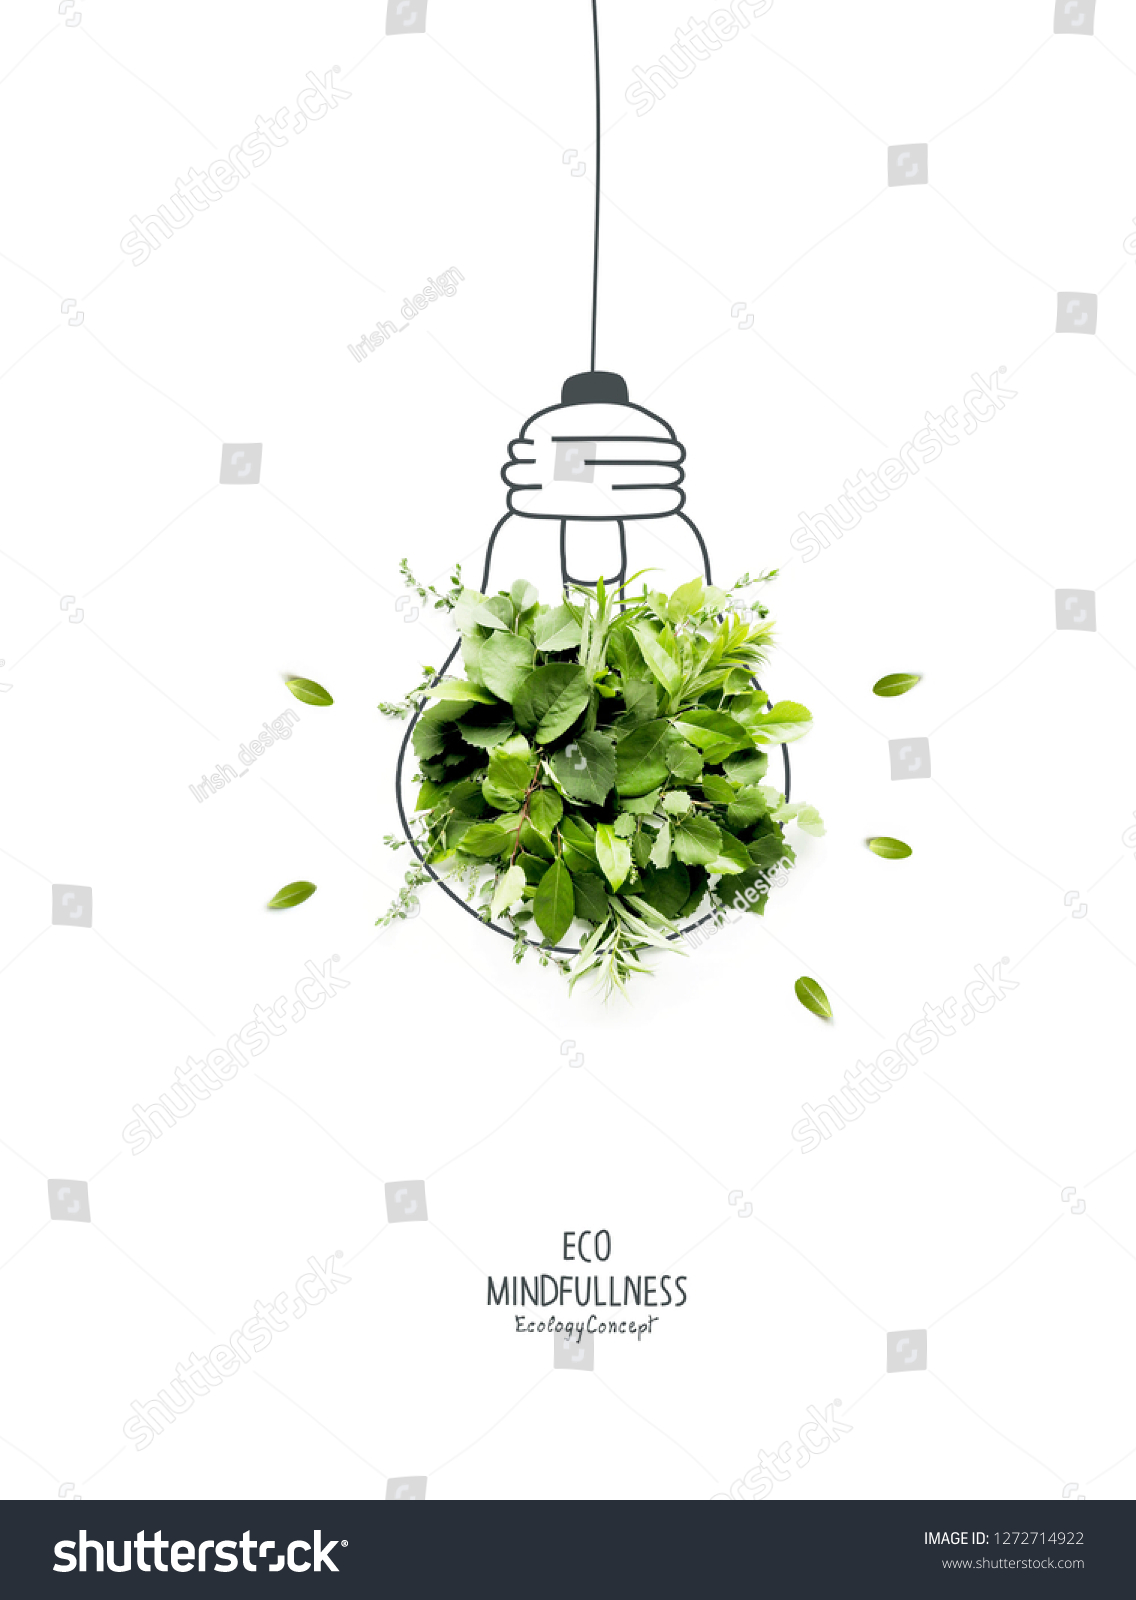 Energy saving eco lamp, made with green sprout and leaves,isolated on white background. LED lamp with green leaf. Minimal nature concept.Think Green.Ecology Concept. Environmentally friendly planet.
 #1272714922